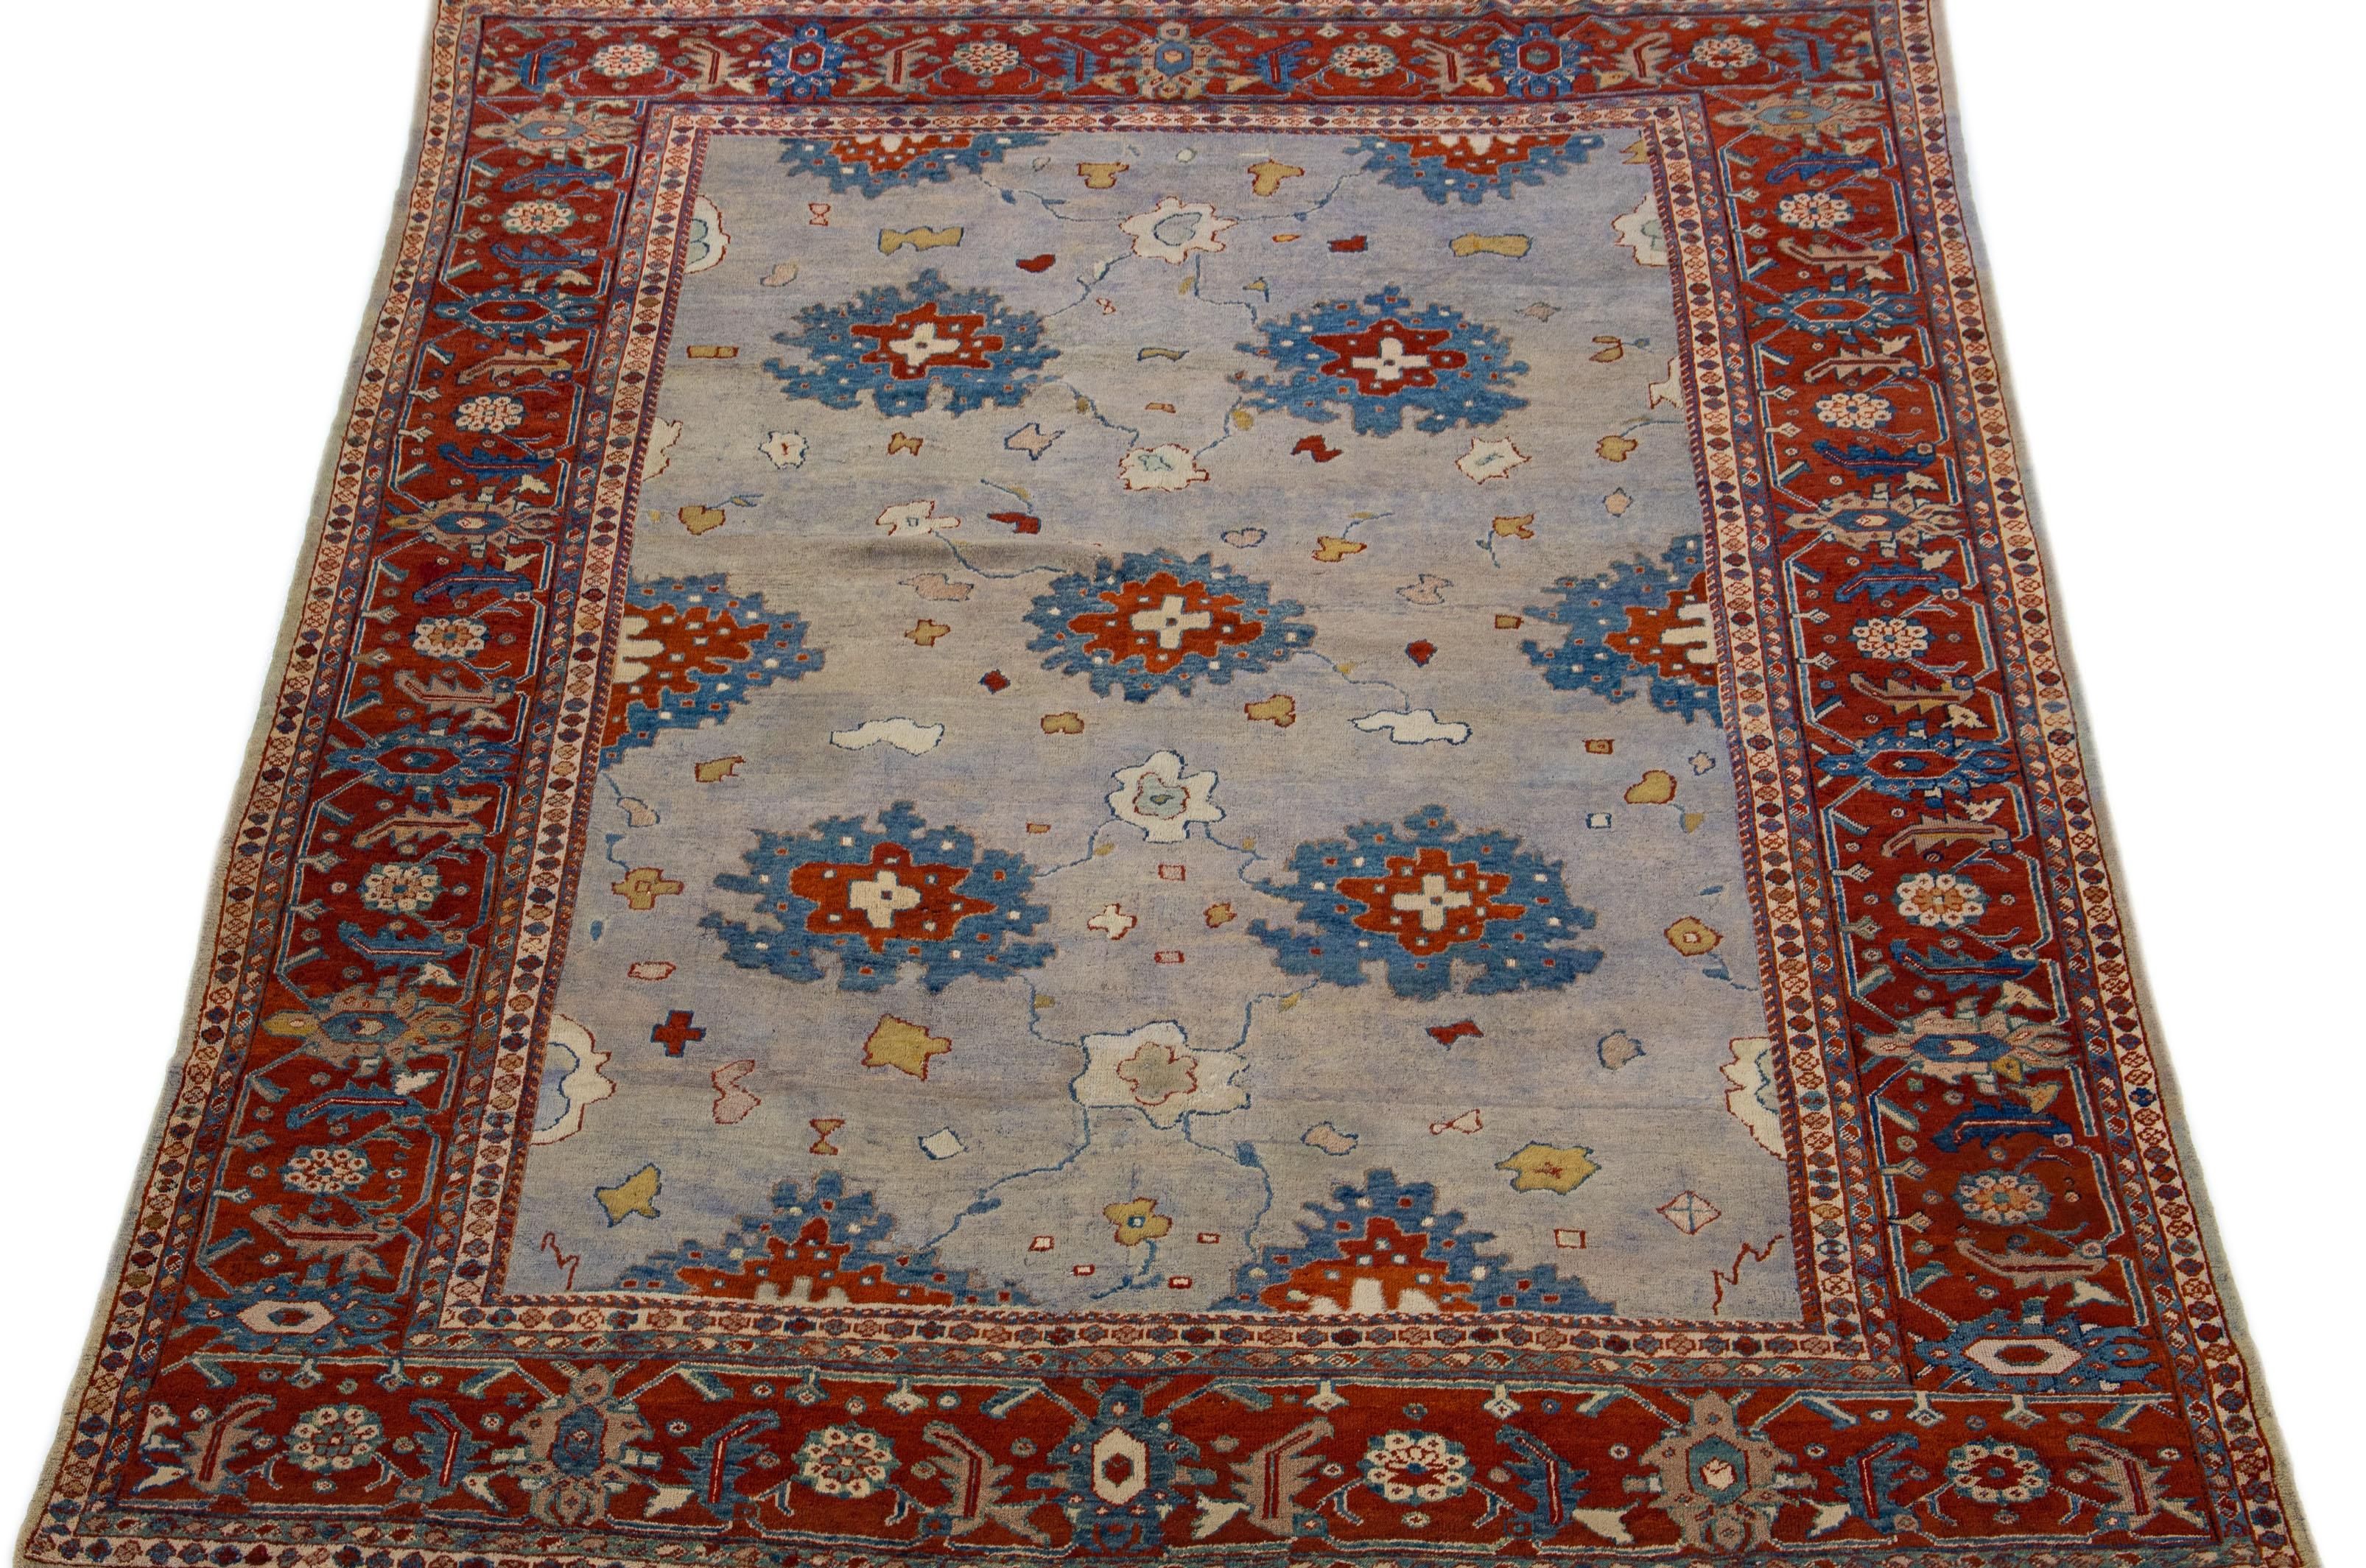 This antique Persian wool rug has exquisite craftsmanship and intricate hand-knotted mahal design. The gray color field complements the rusted frame, adorned with delicate blue and beige accents in an elegant all-over floral pattern.

This rug